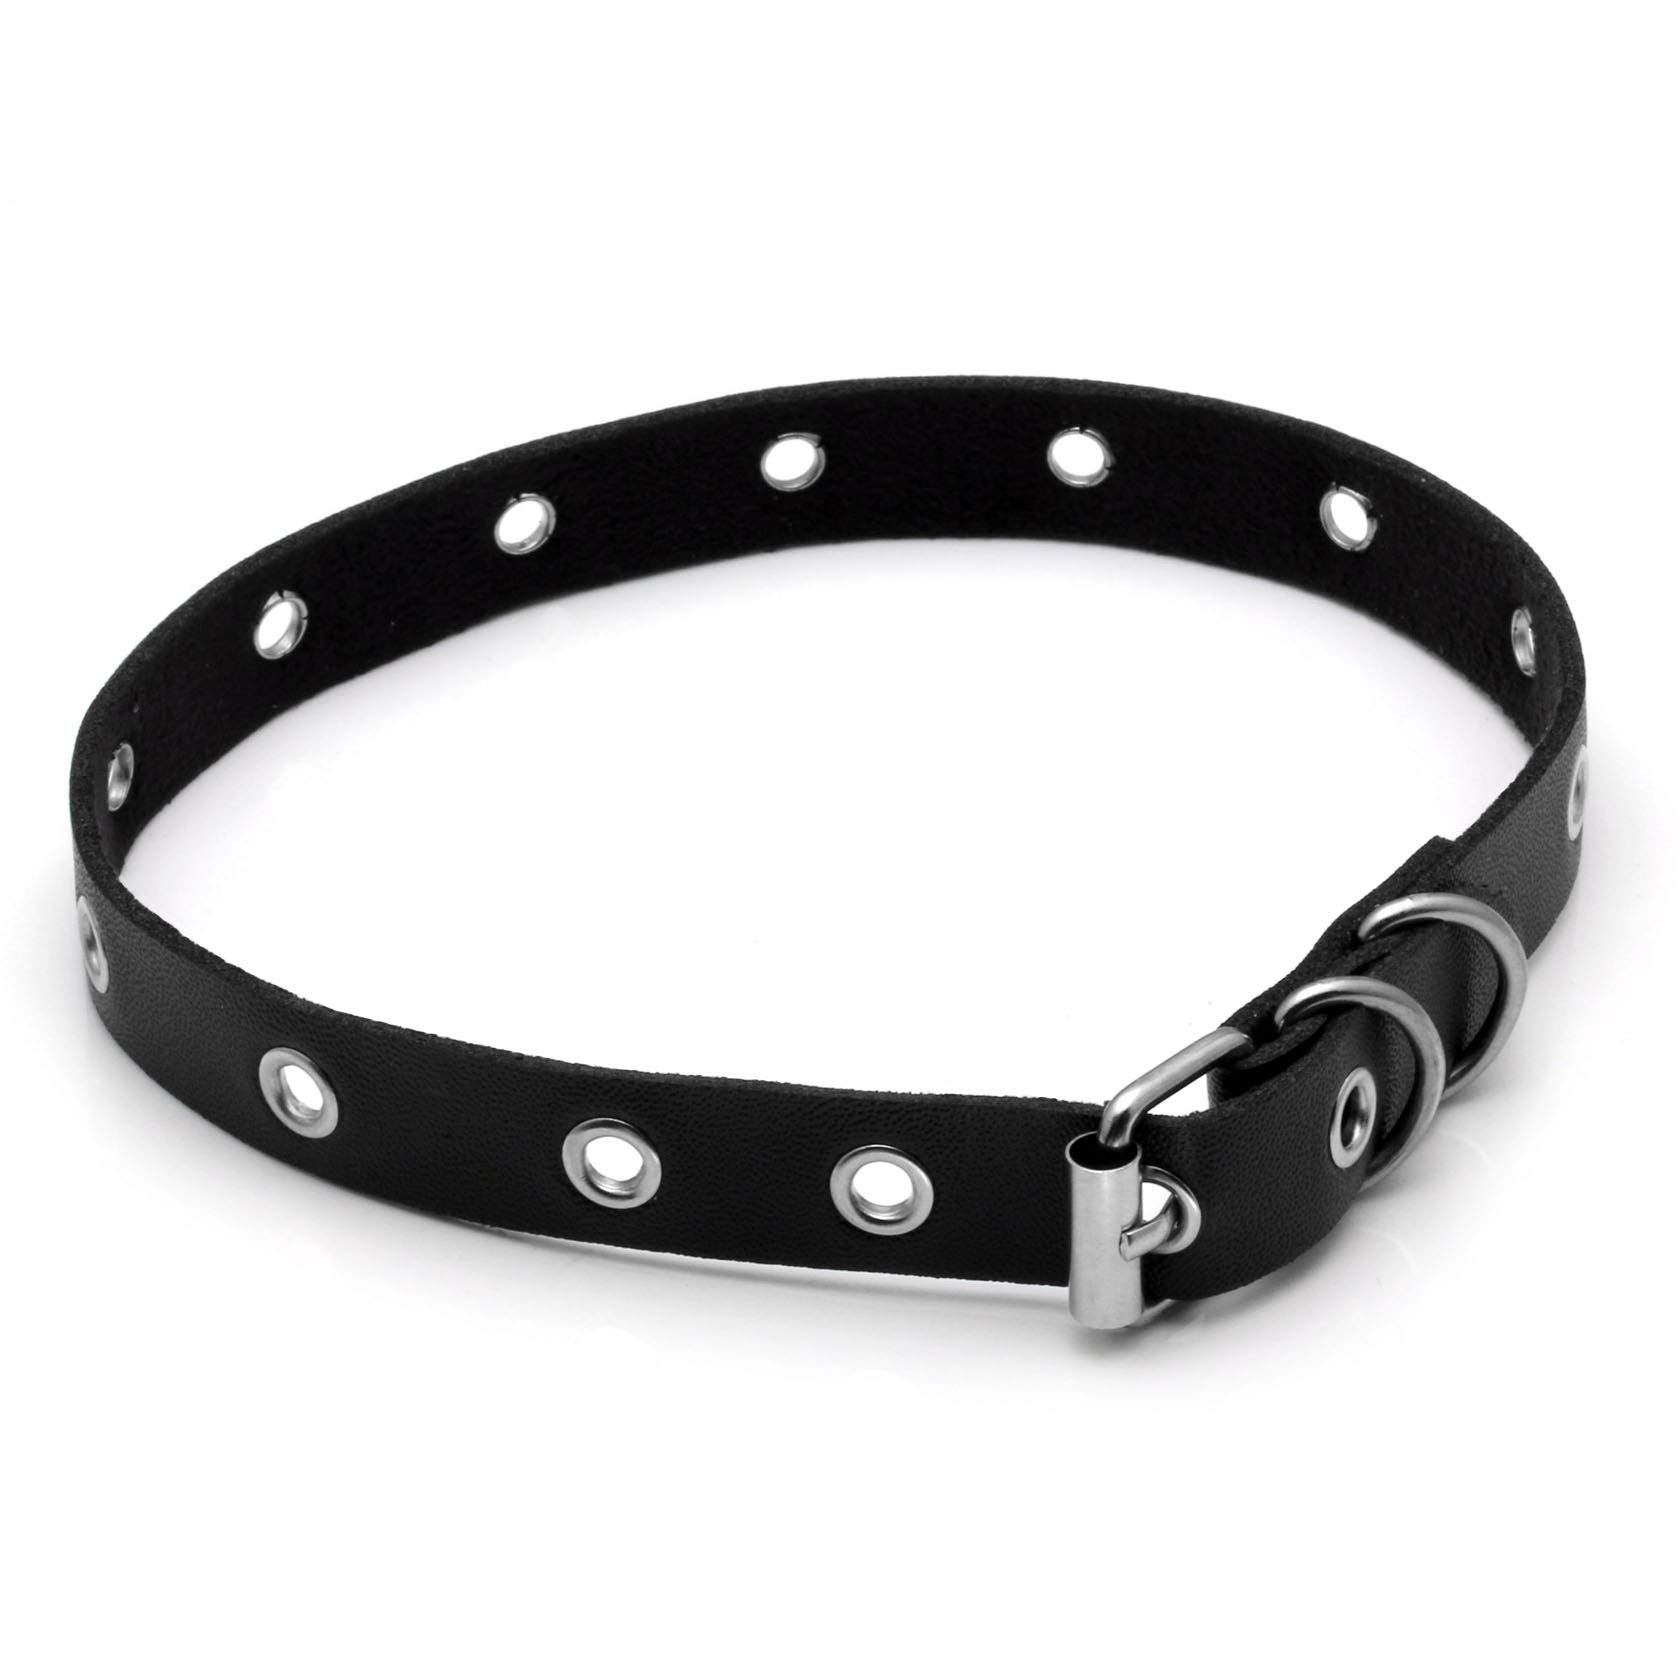 MILAKOO Pu Leather Necklace Gromment Eyelet Choker for Women Men Punk Collar Goth Emo Accessories